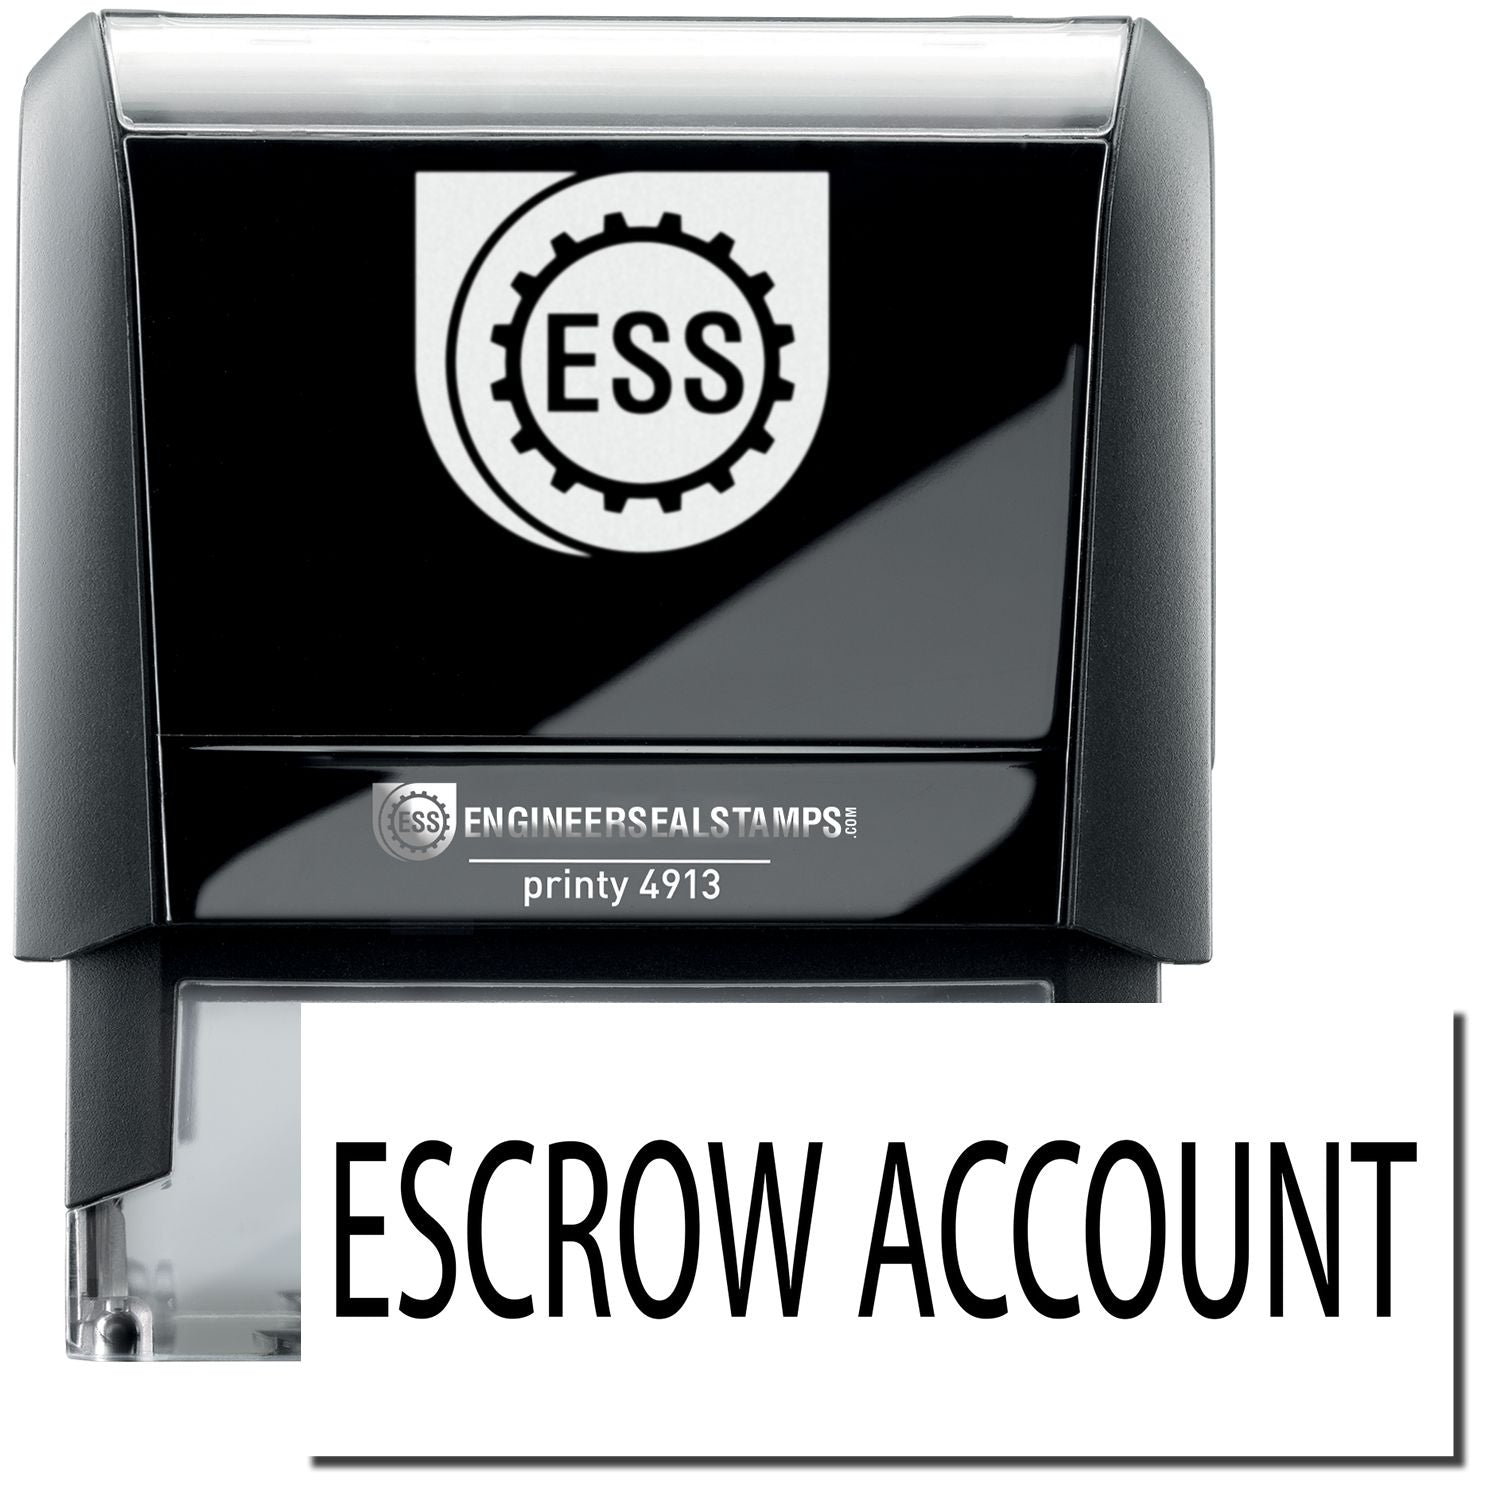 A self-inking stamp with a stamped image showing how the text "ESCROW ACCOUNT" in a large bold font is displayed by it.